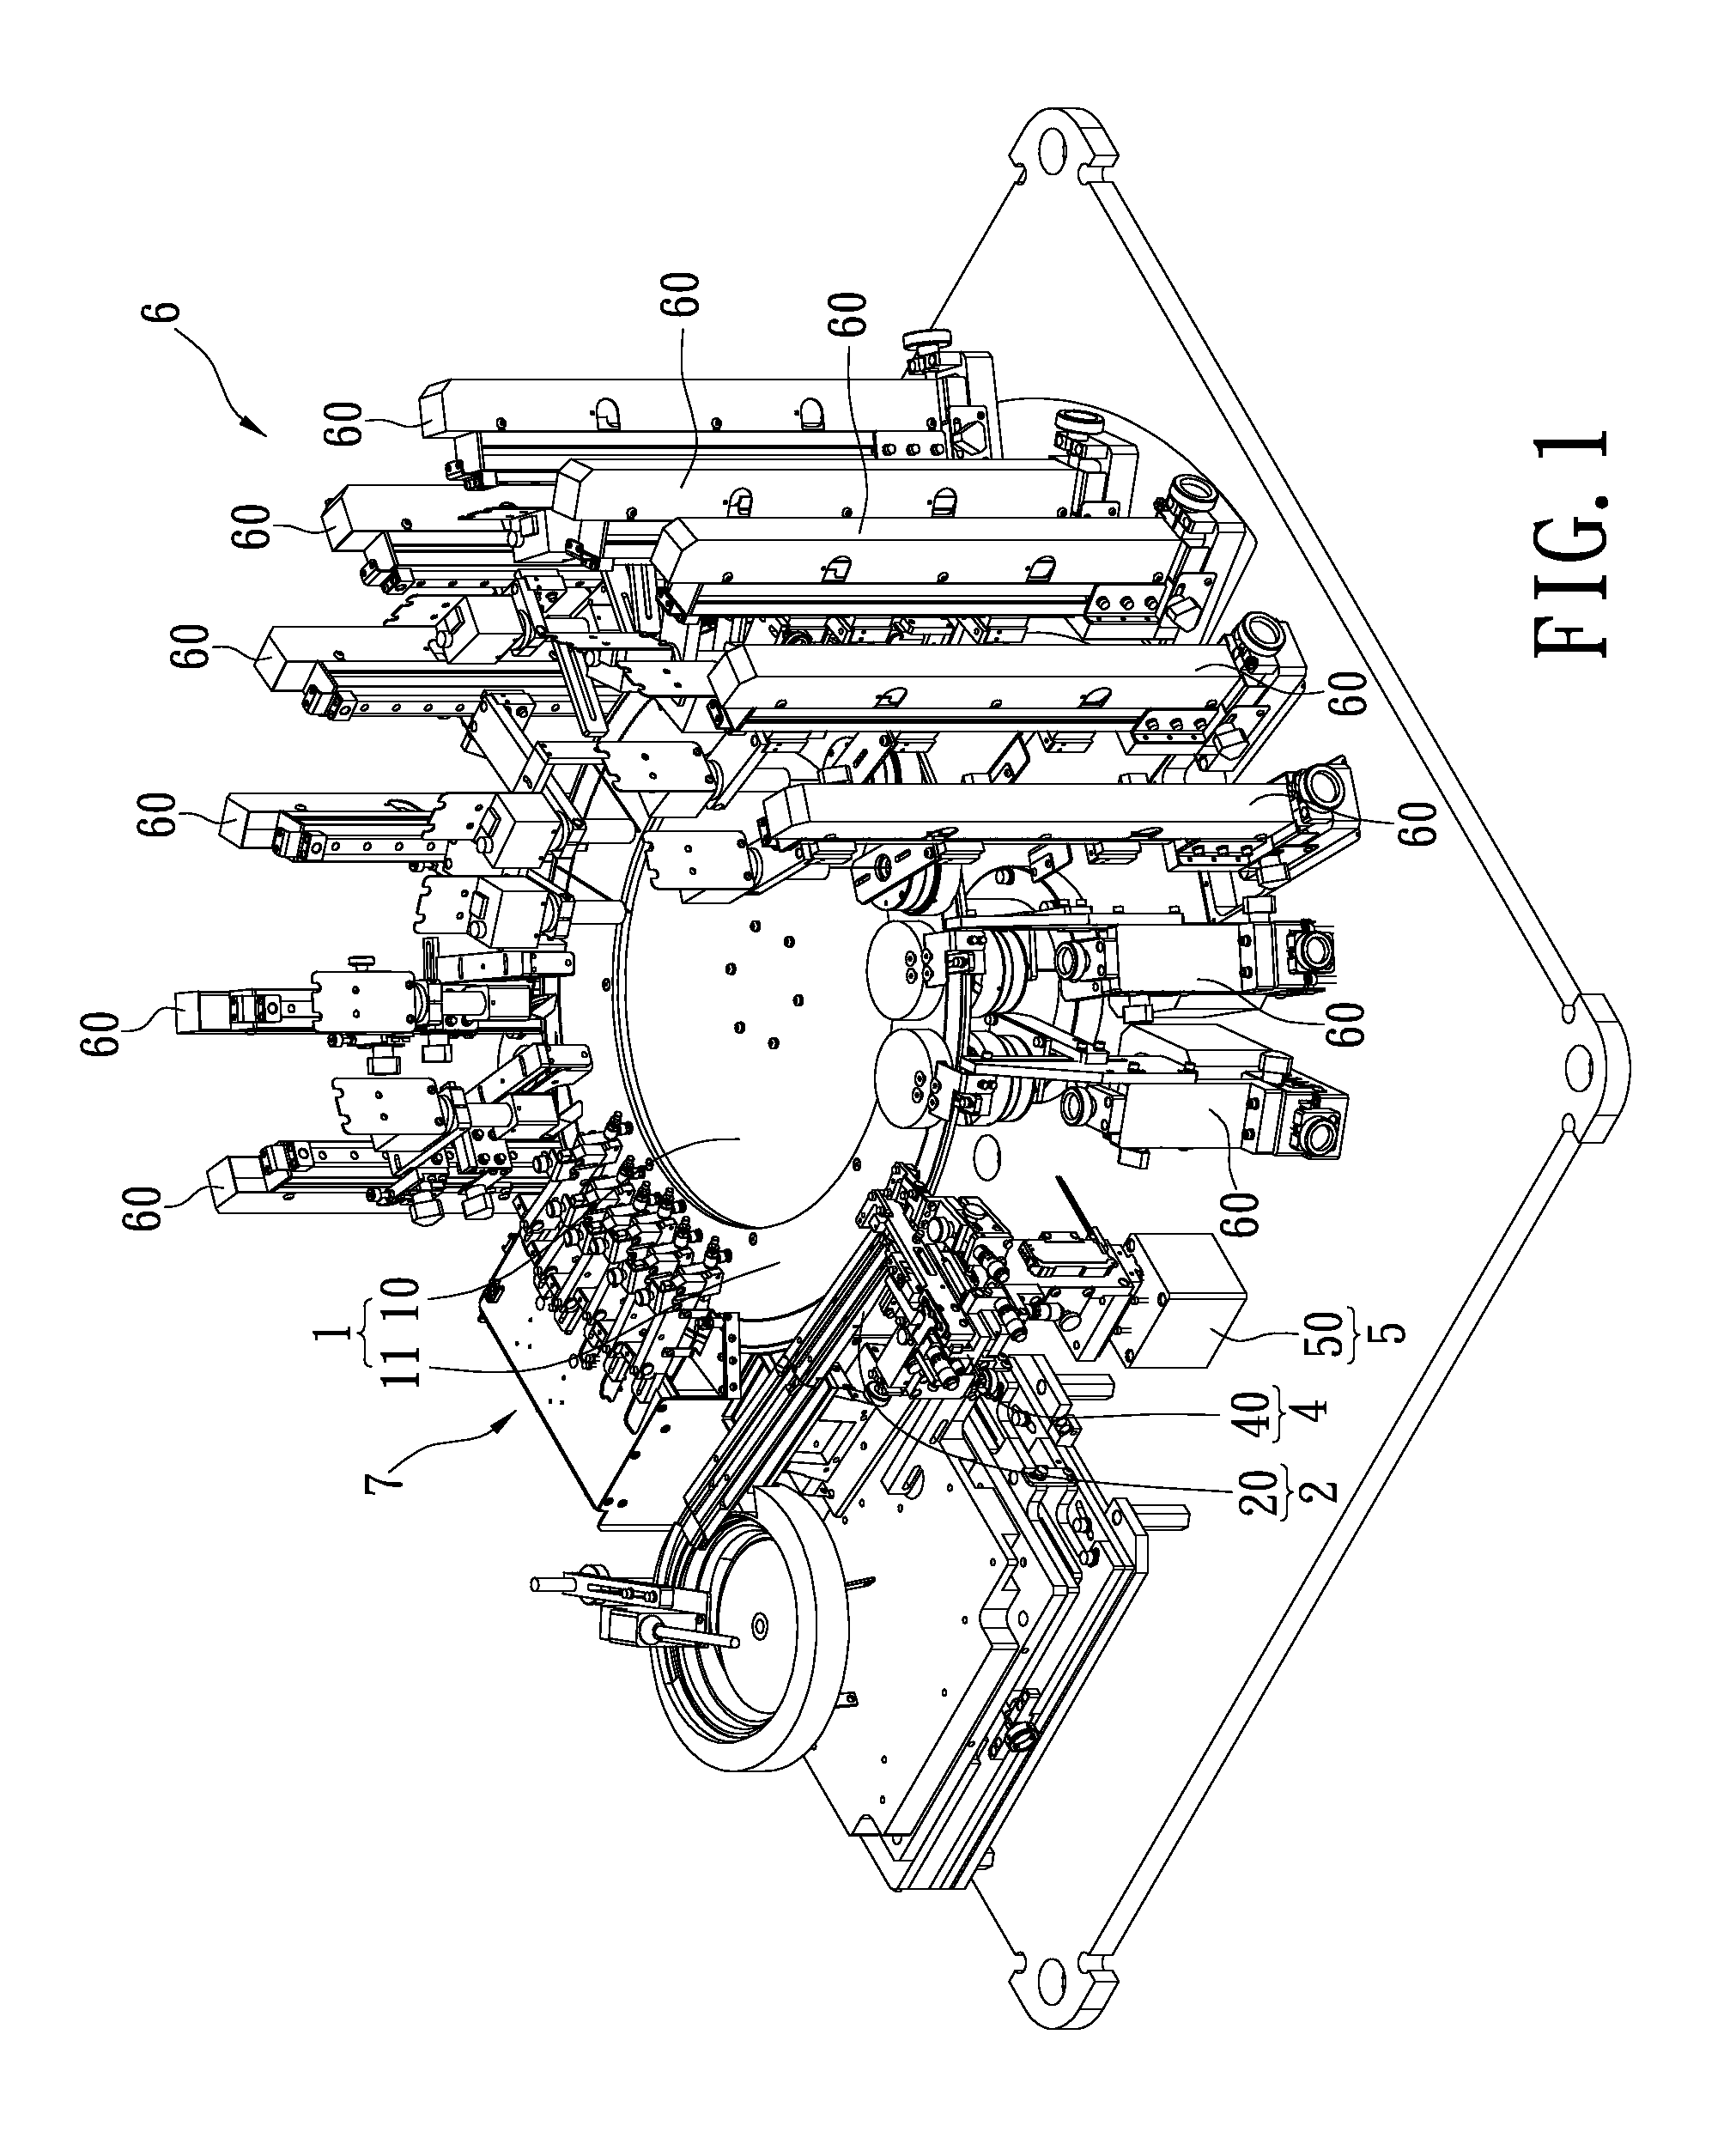 Multi-track detection system for detecting the appearance of electronic elements